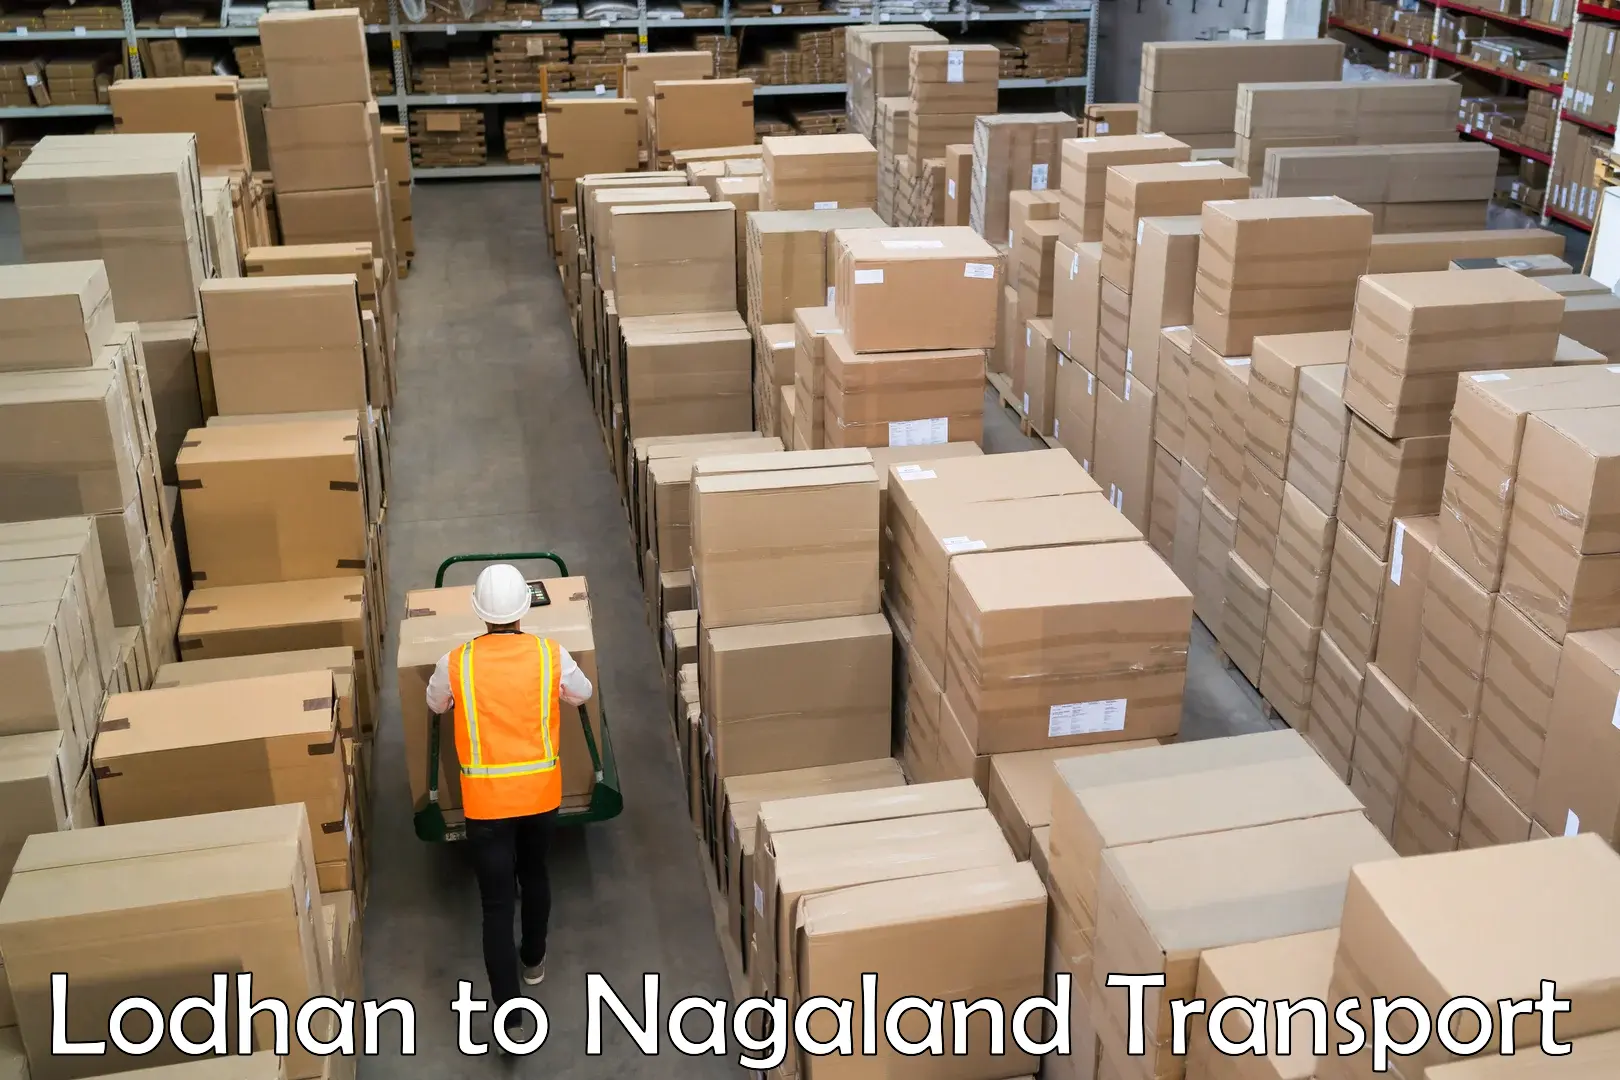 Air freight transport services Lodhan to Nagaland